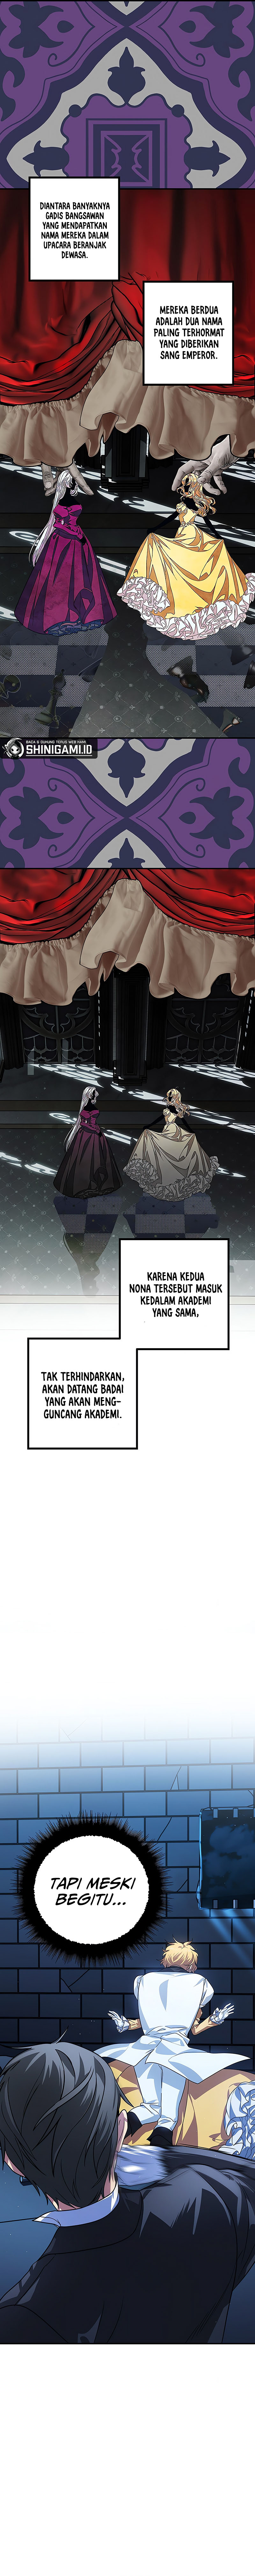 124758-sss-class-suicide-hunter Chapter 86